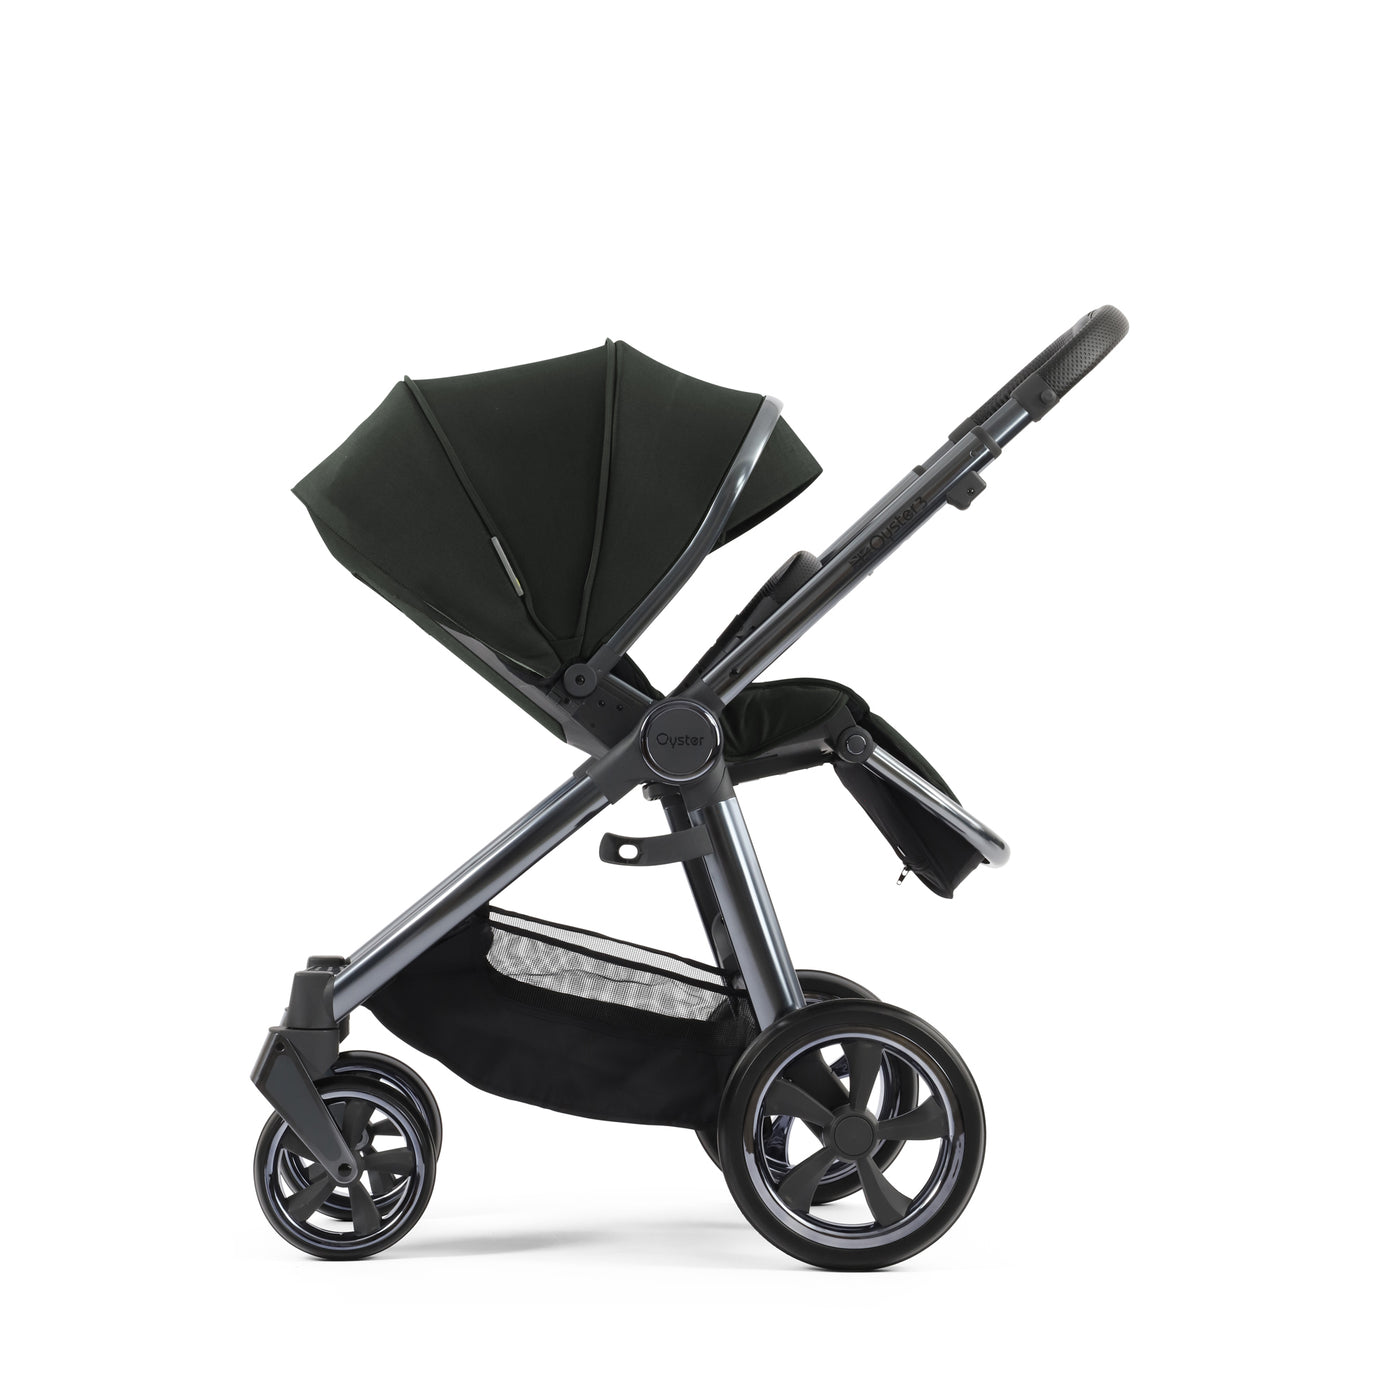 Babystyle Oyster 3 Essential Bundle with Maxi-Cosi Pebble 360 Pro & Base - Black Olive